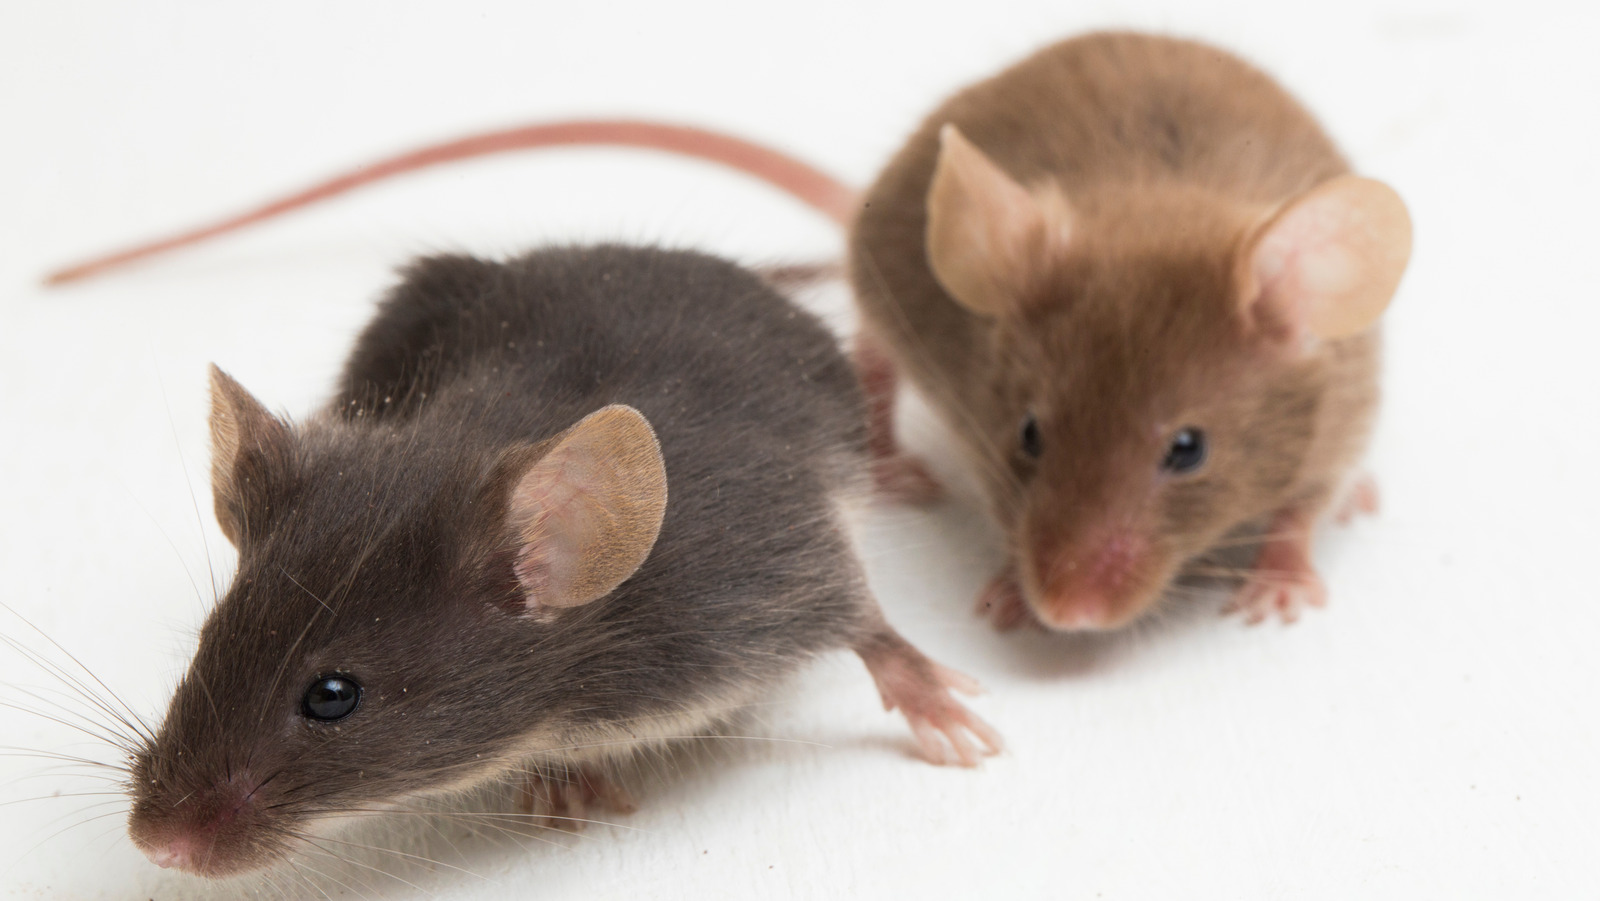 How To Get Rid Of Mice Humanely